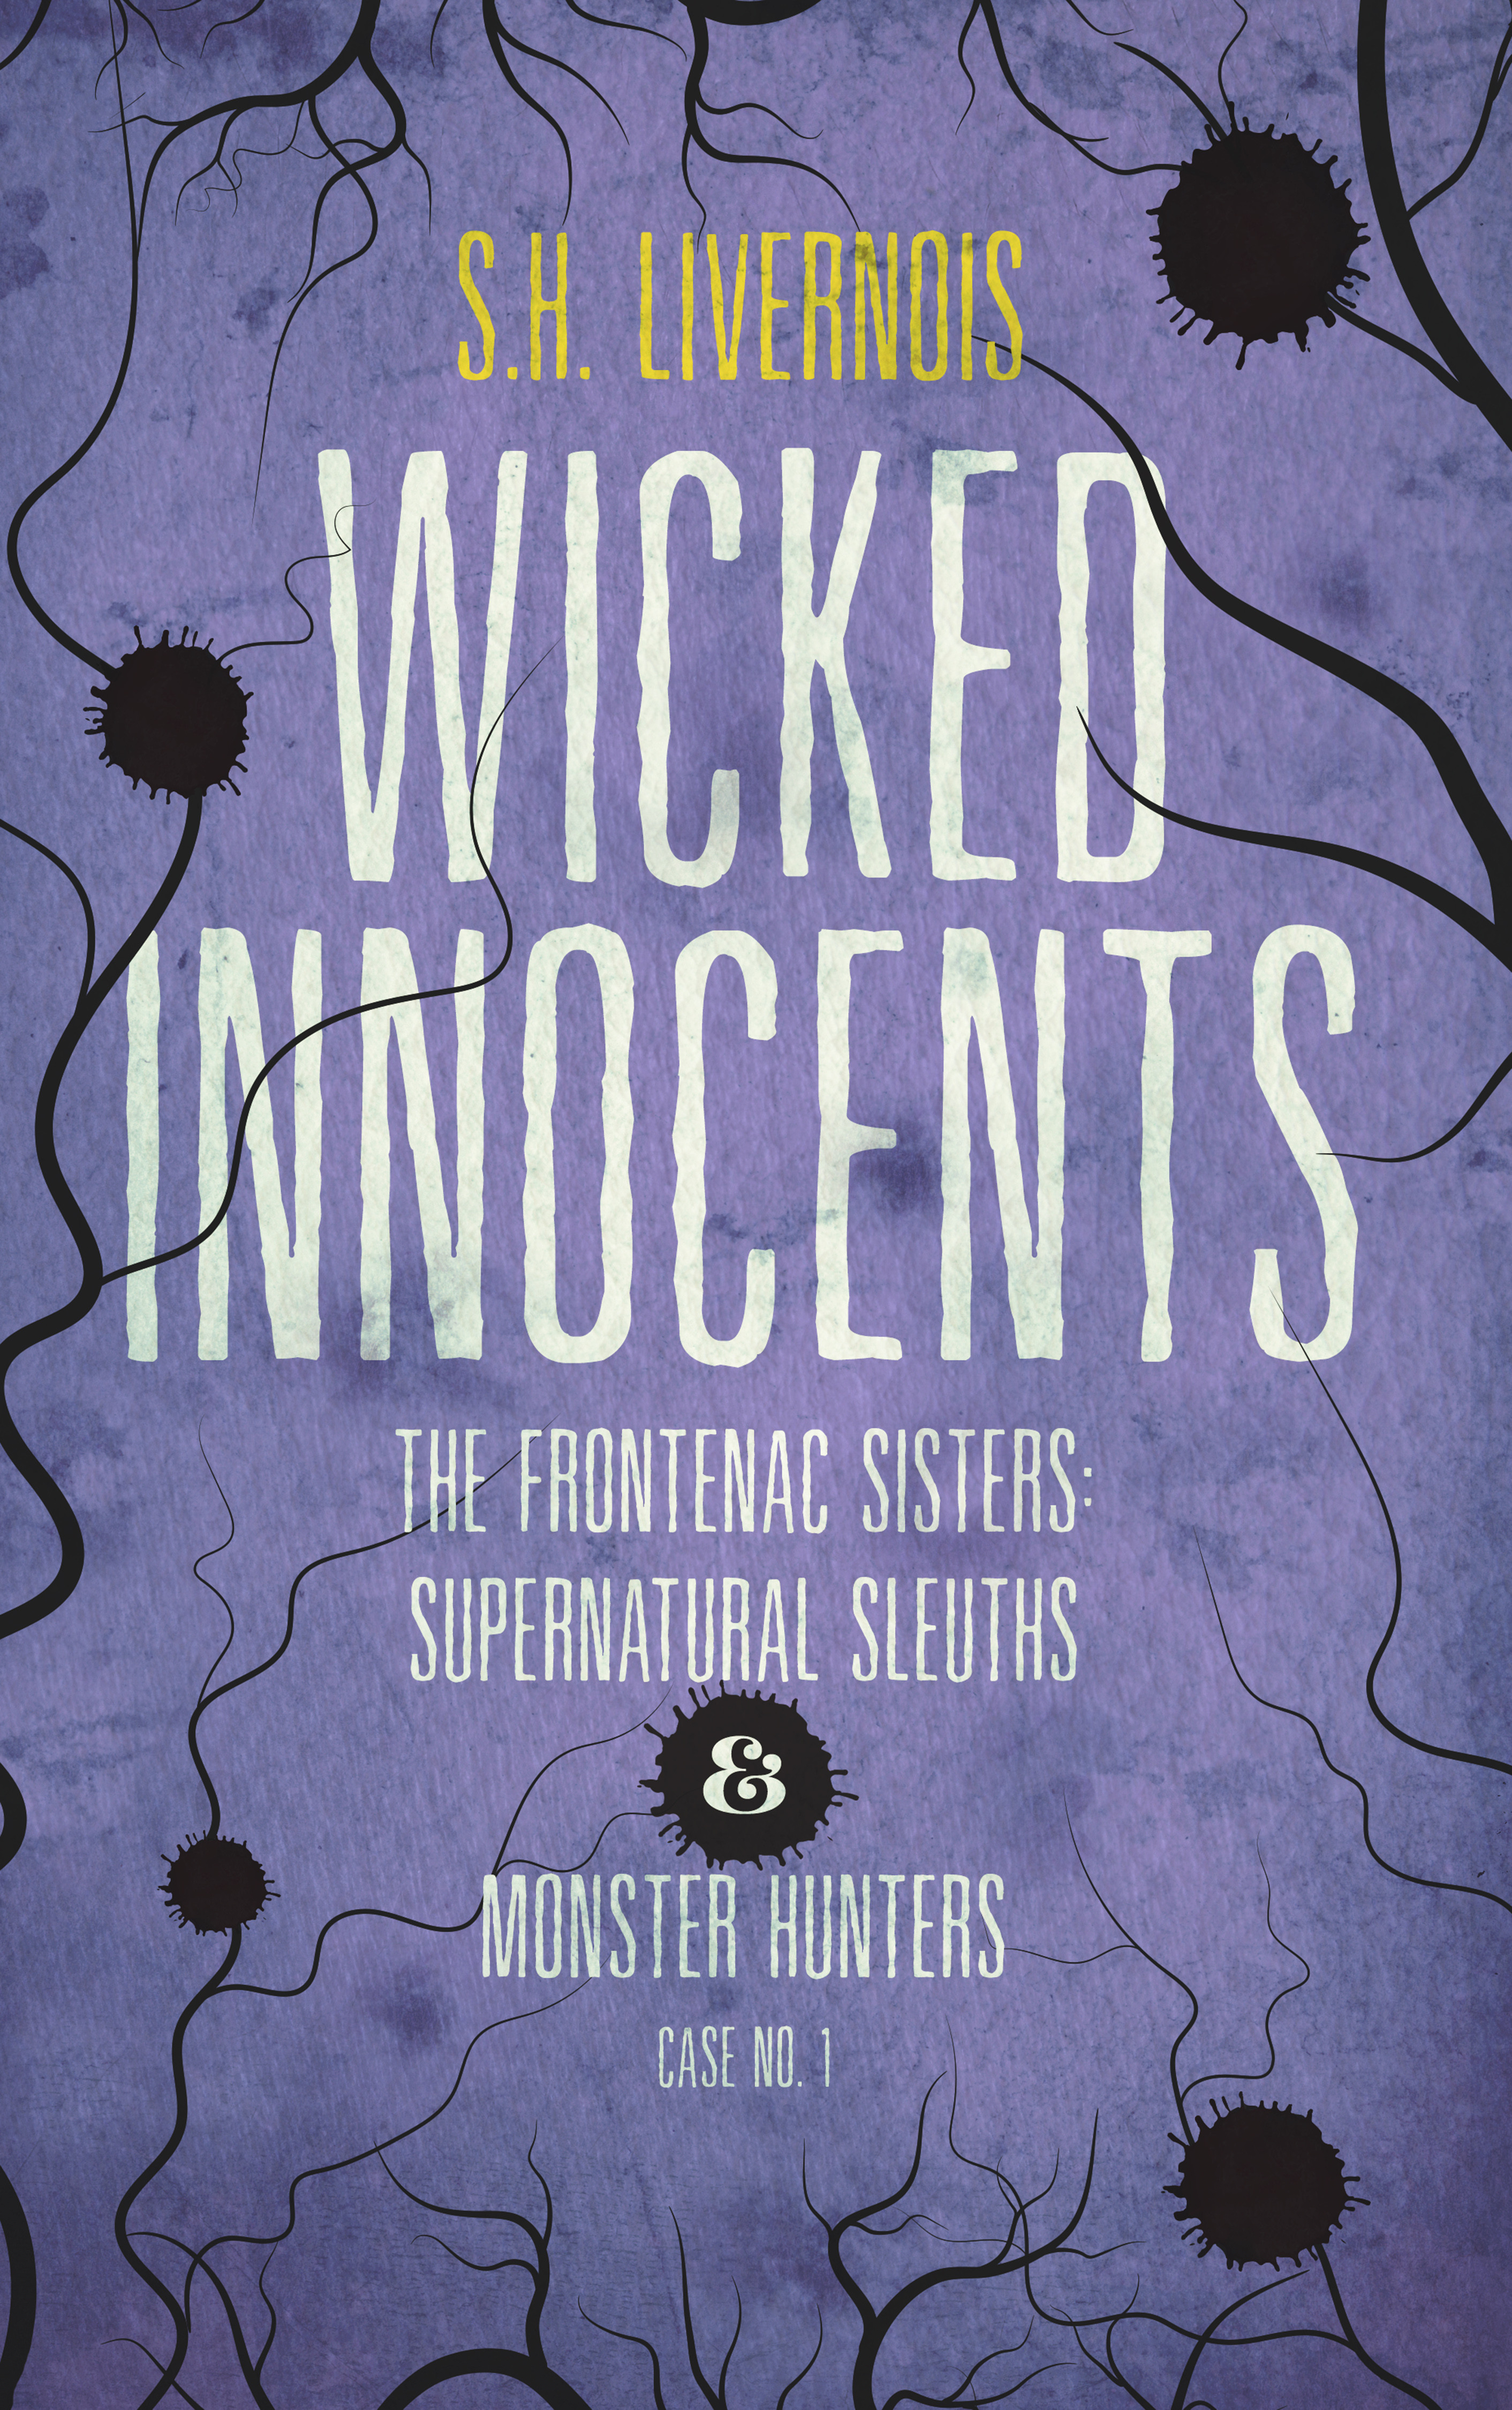 Wicked Innocents